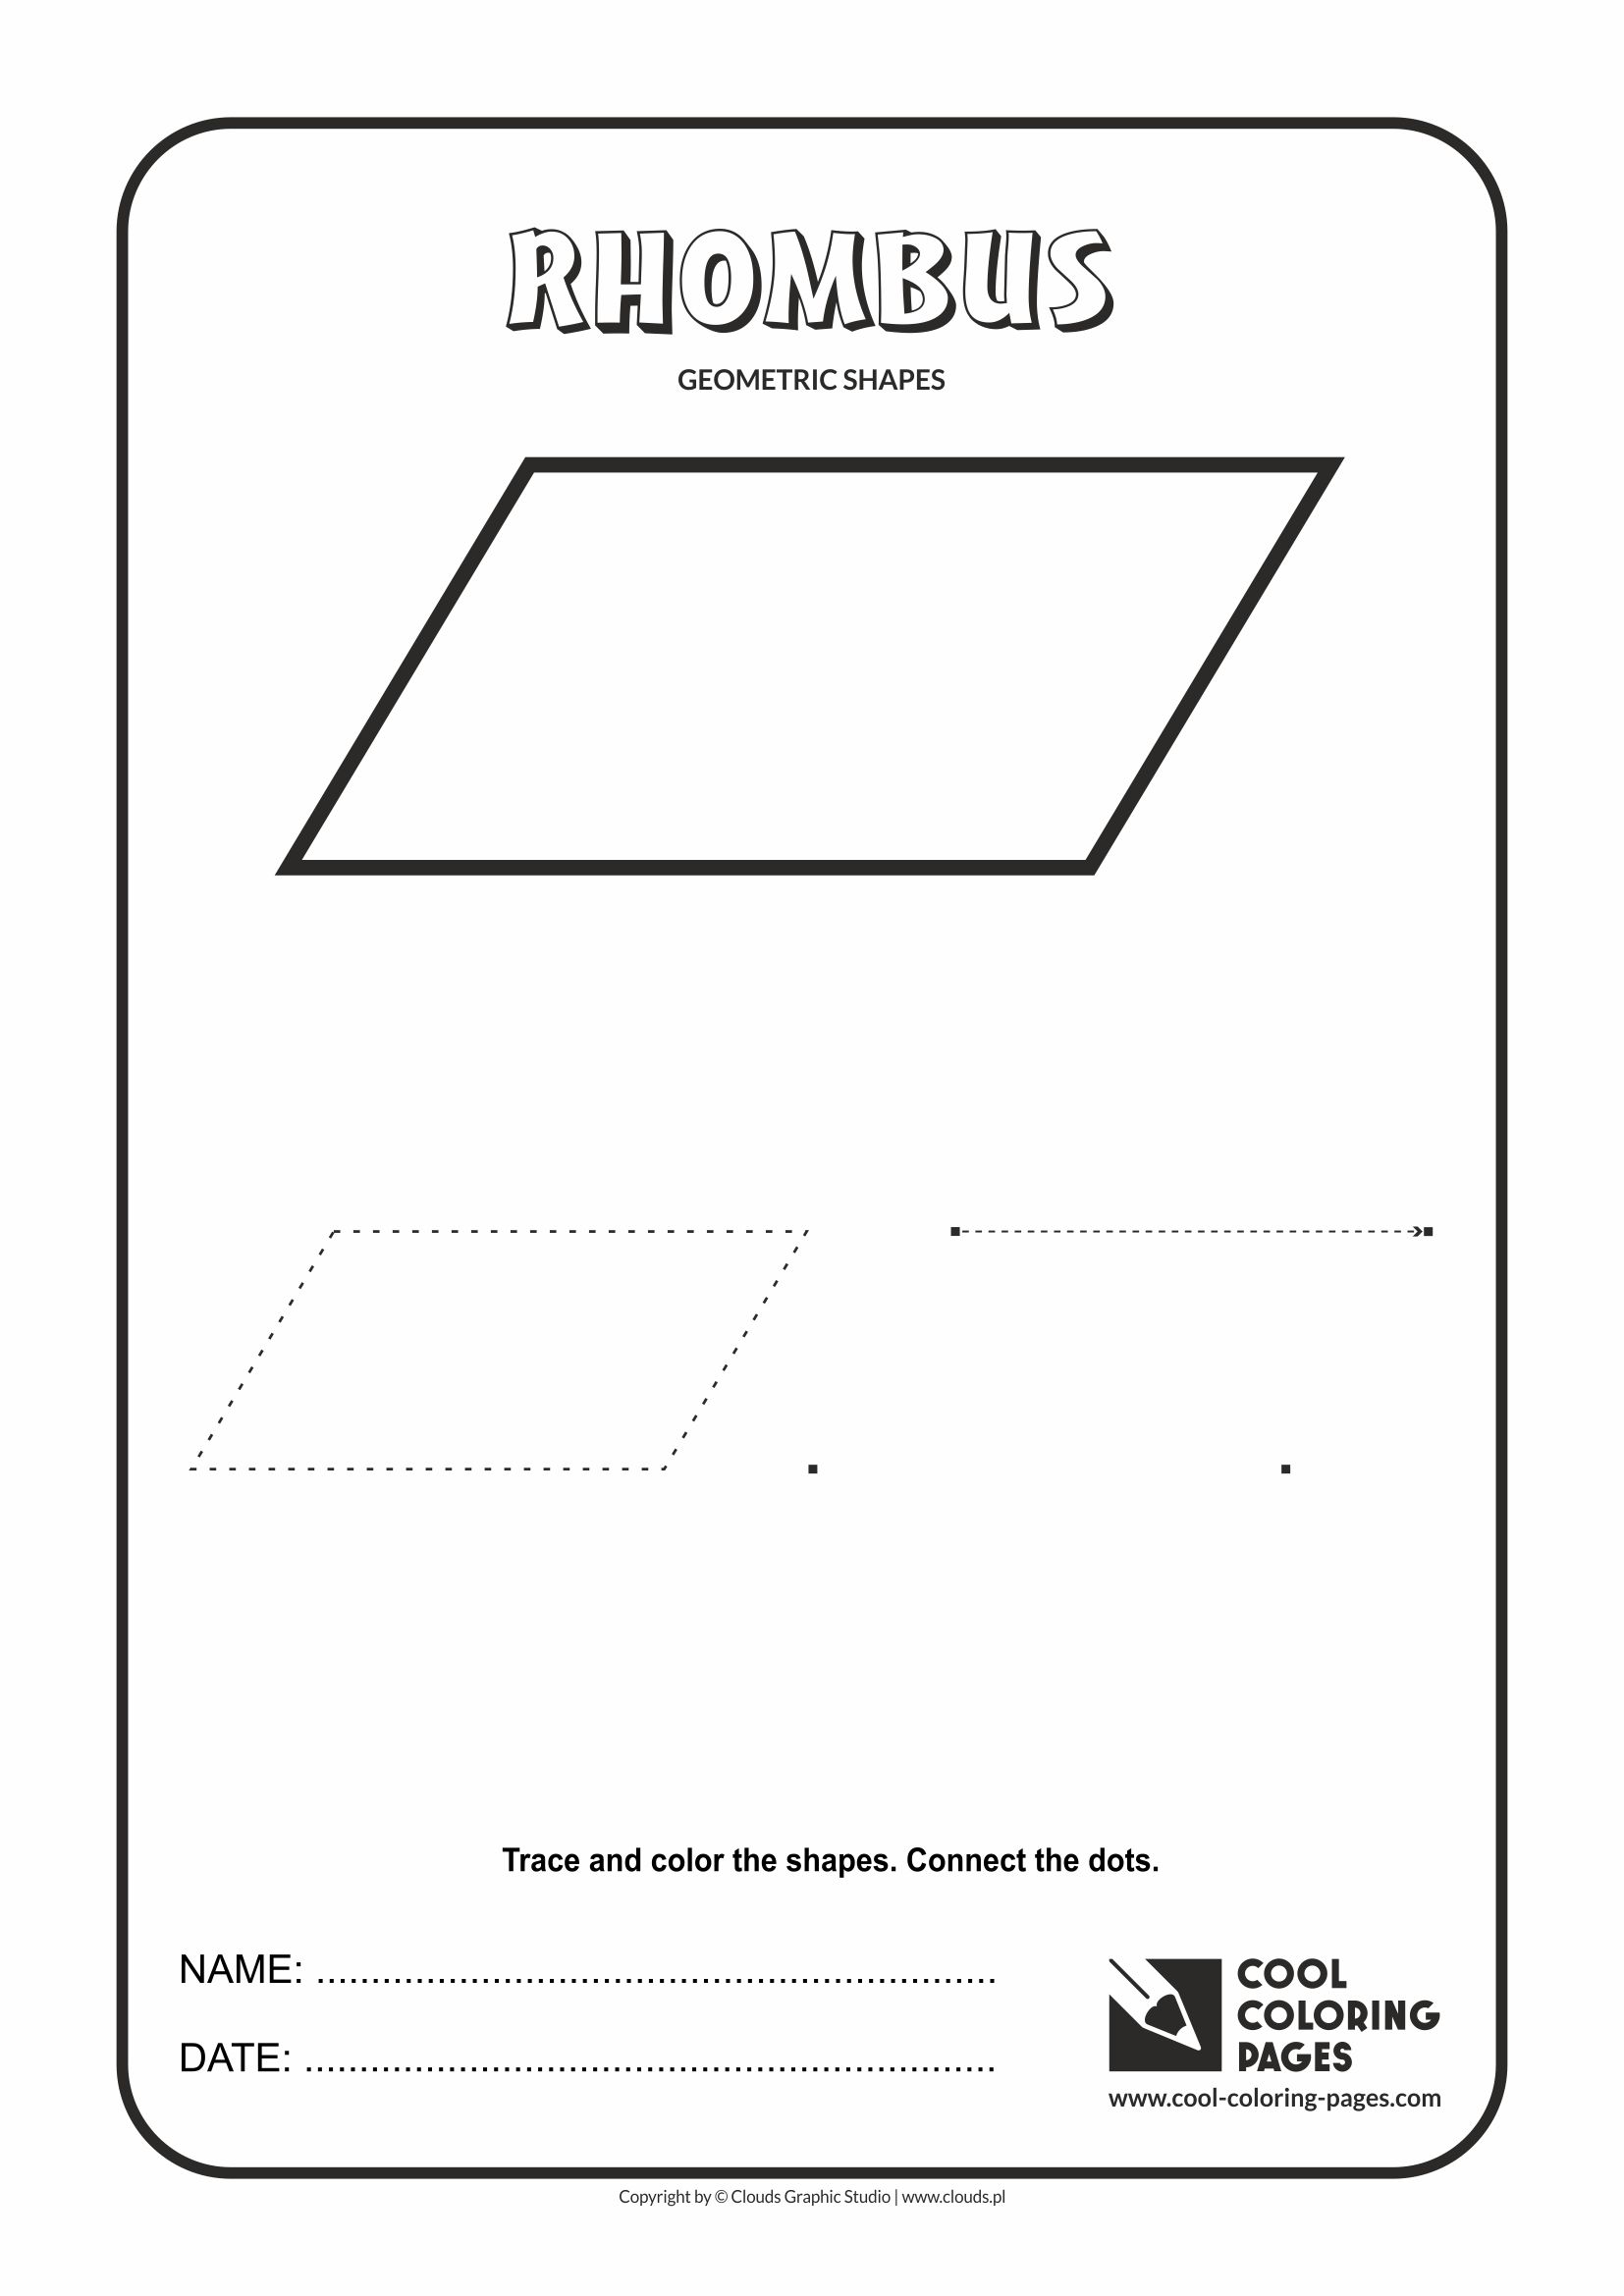 Cool Coloring Pages - Geometric shapes / Rhombus